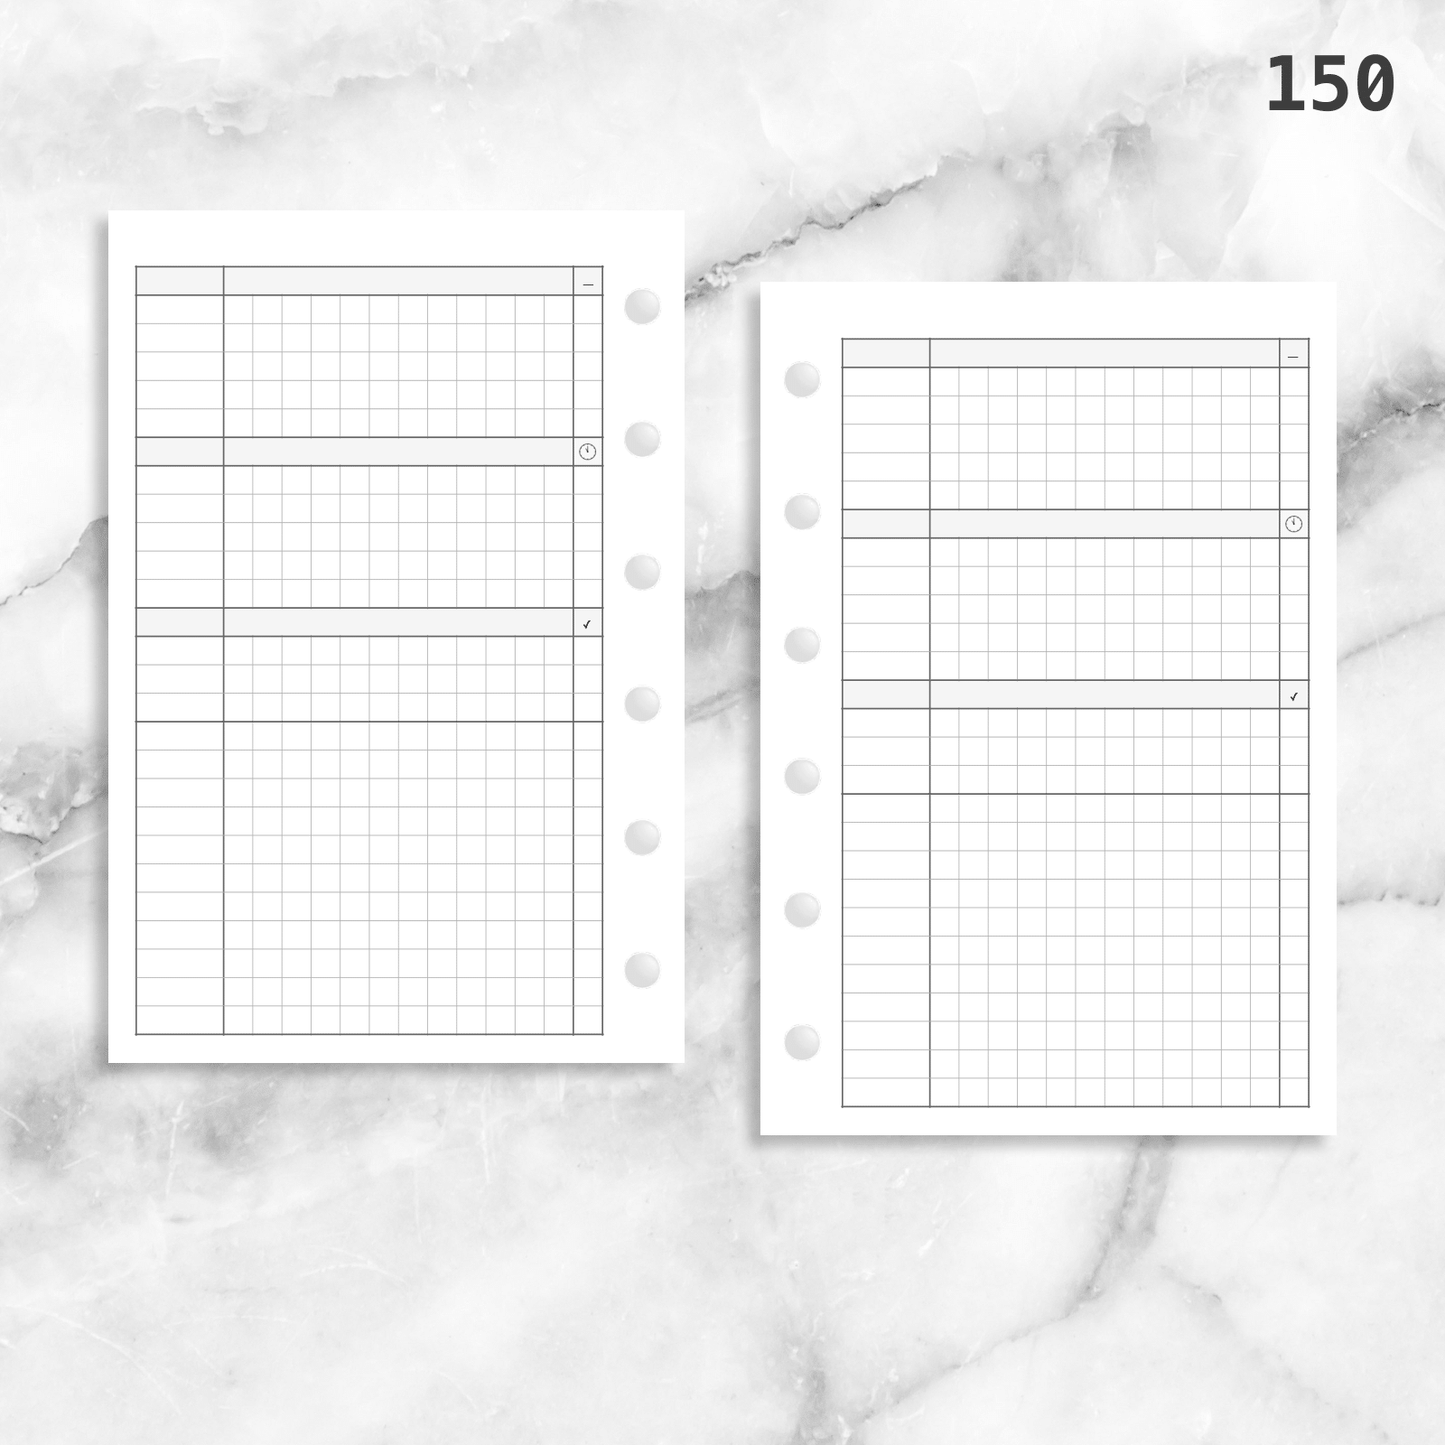 150: Simple Daily Grid w/ Appointments Notes Tasks Categories Do1P